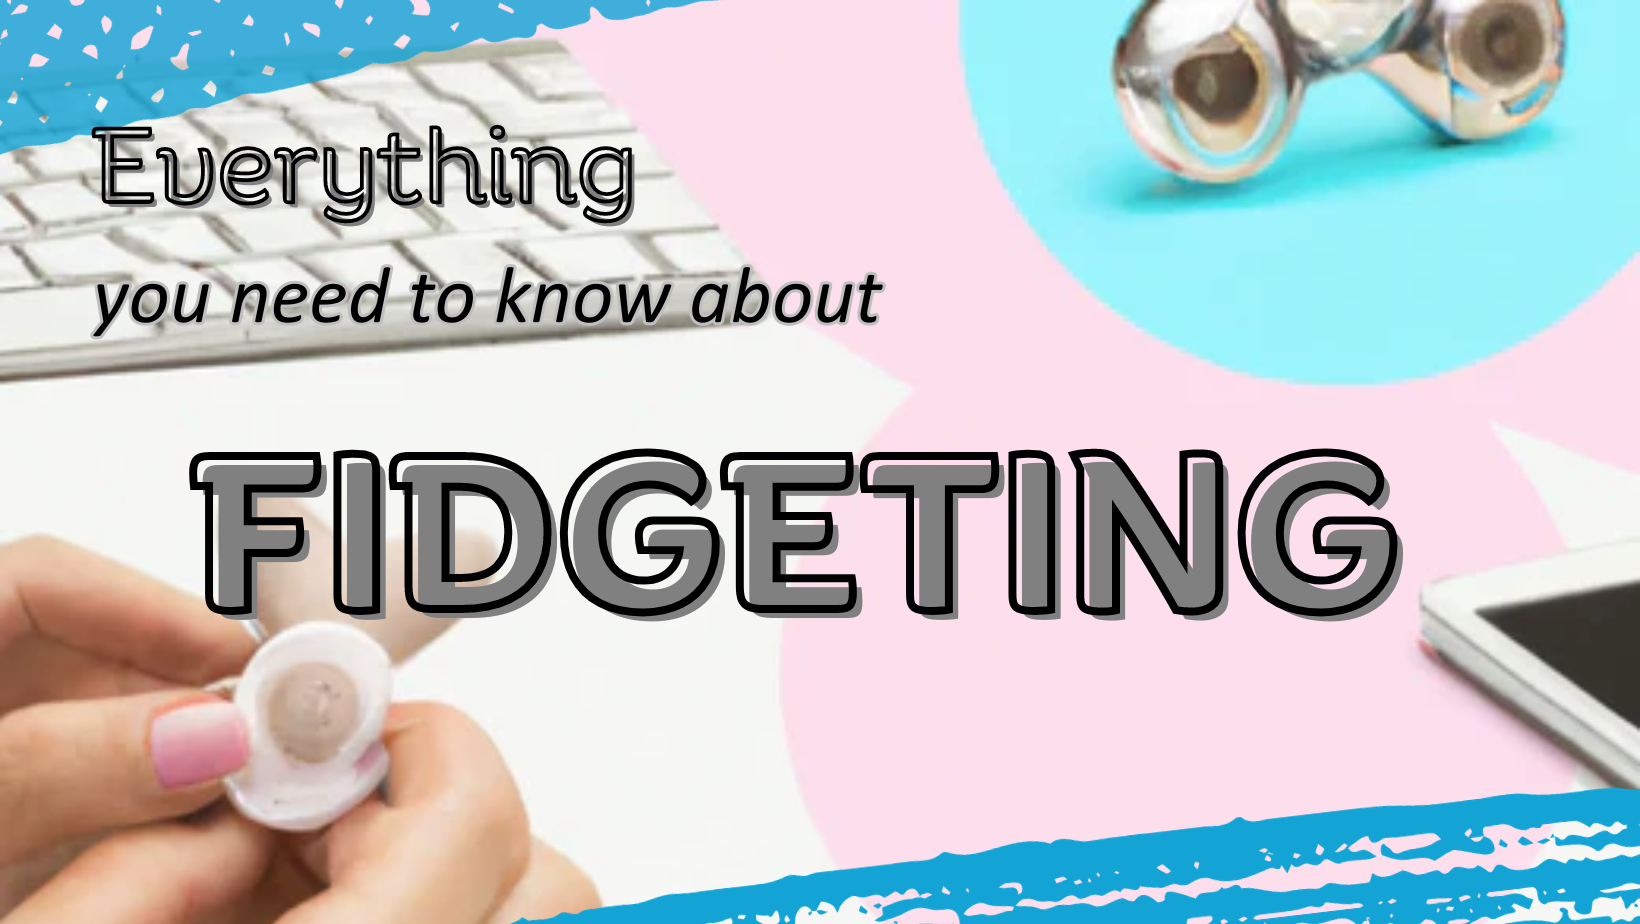 Everything you need to know about fidgeting